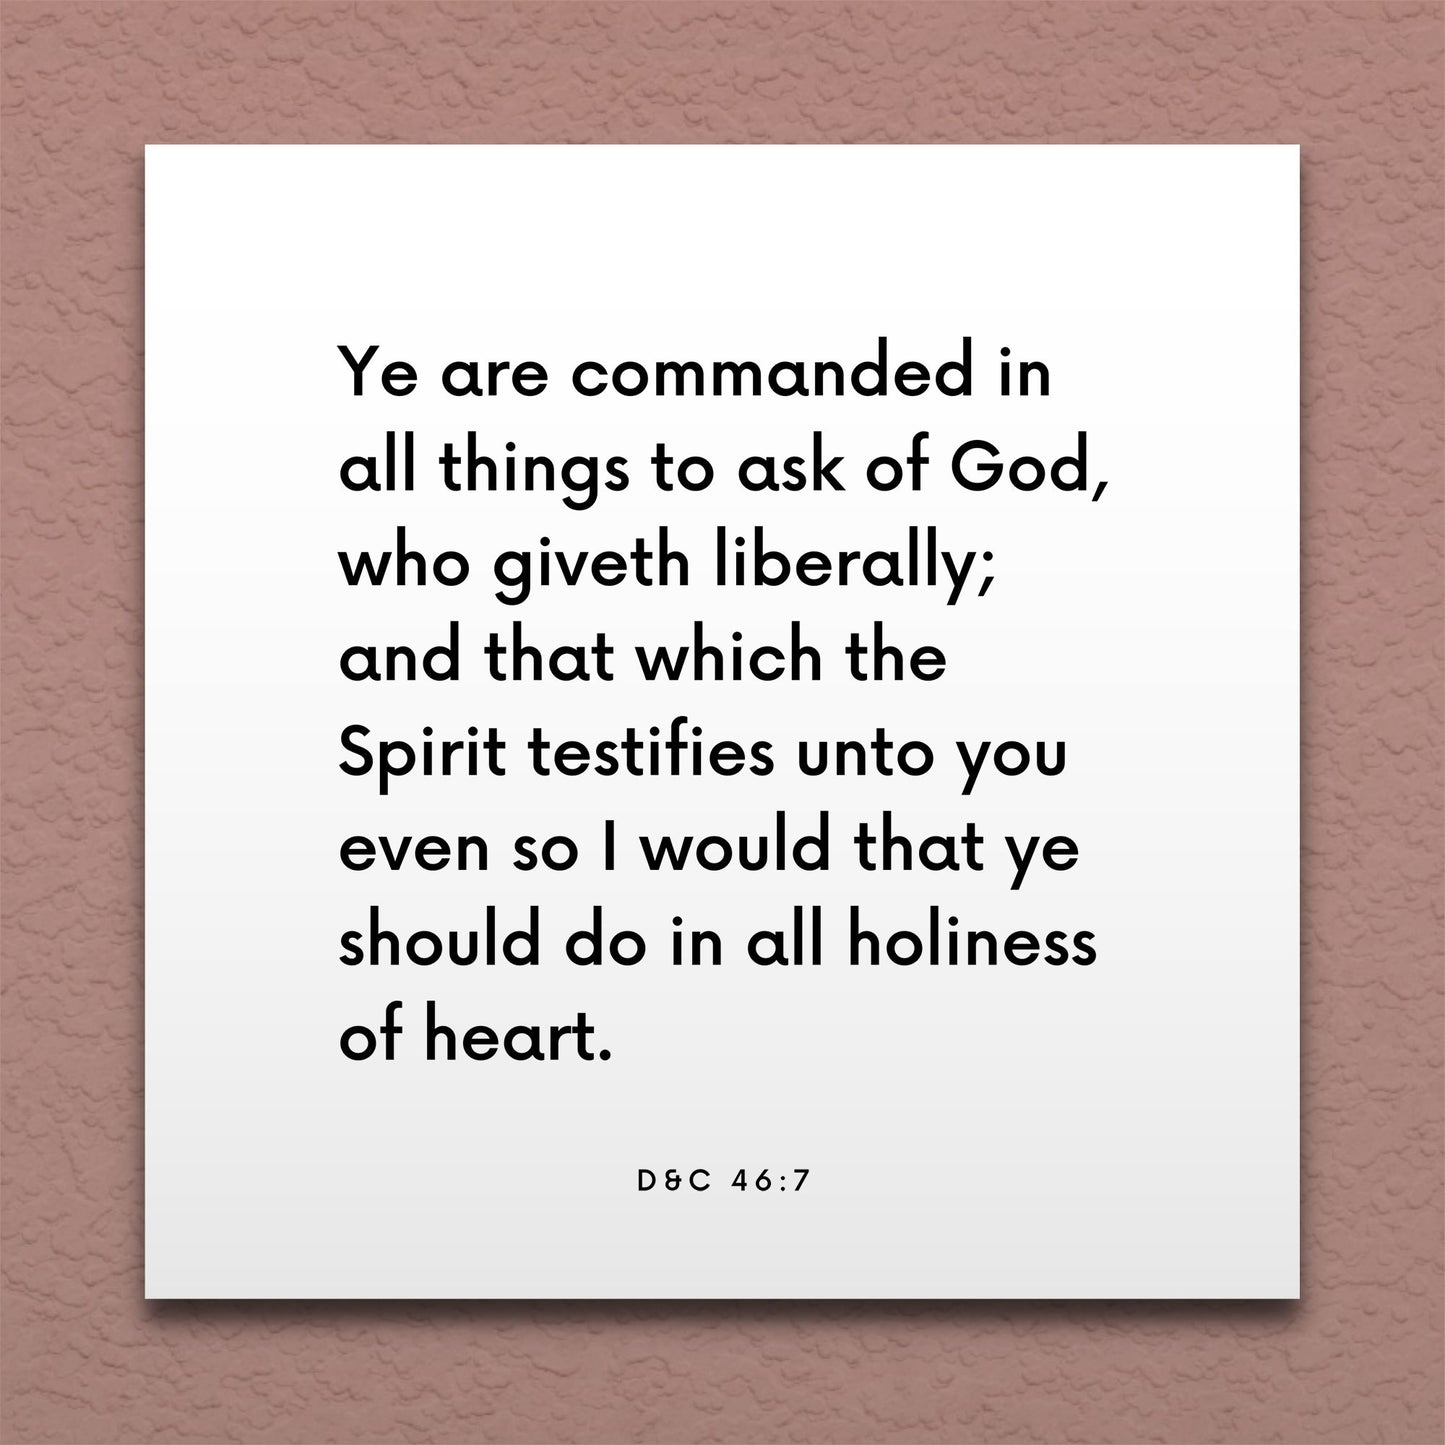 Wall-mounted scripture tile for D&C 46:7 - "Ye are commanded in all things to ask of God"